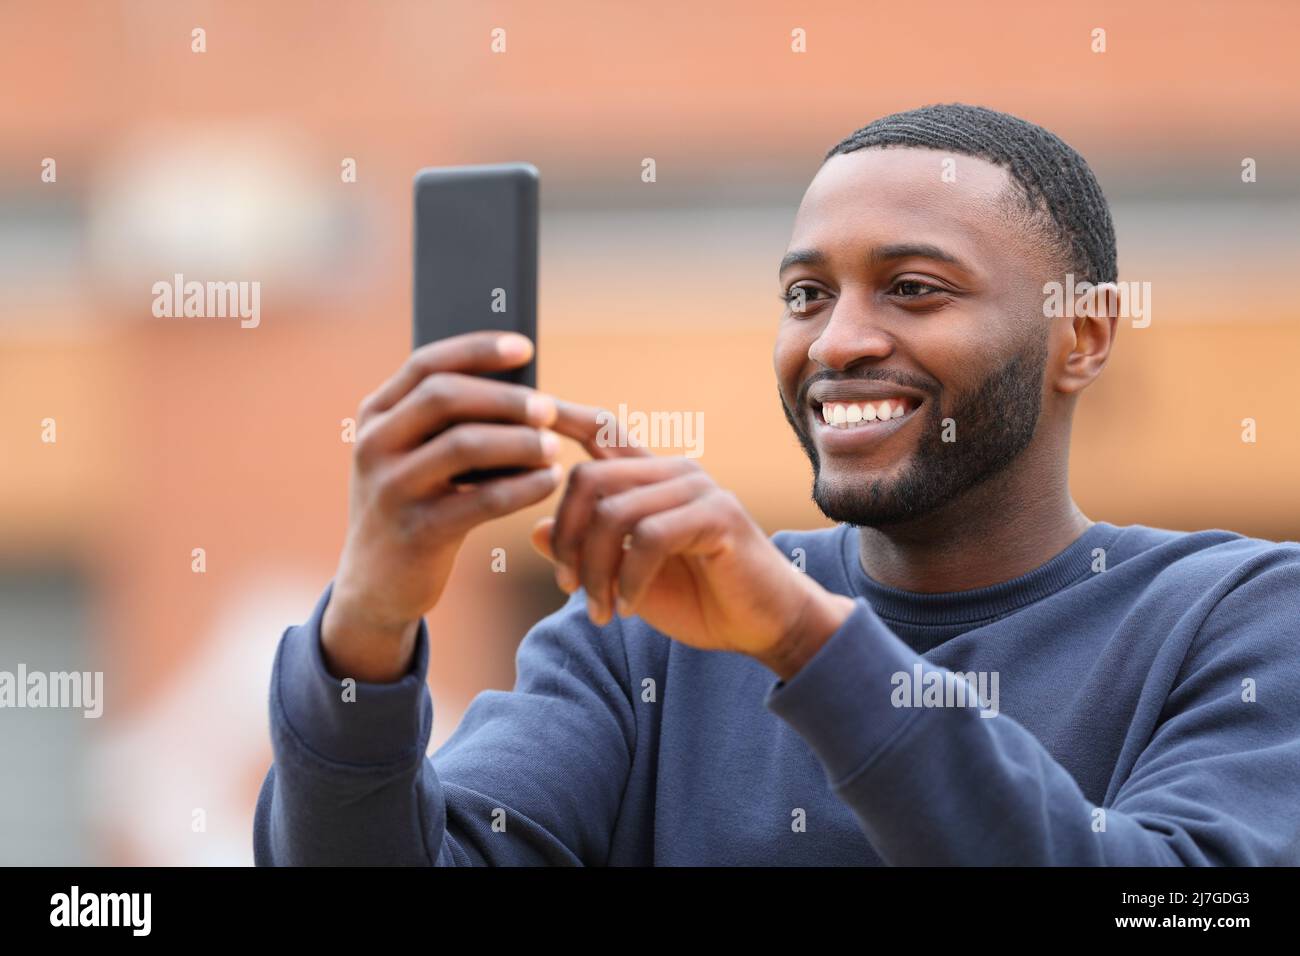 Happy man with black skin taking selfie or photo with smart phone standing in the street Stock Photo